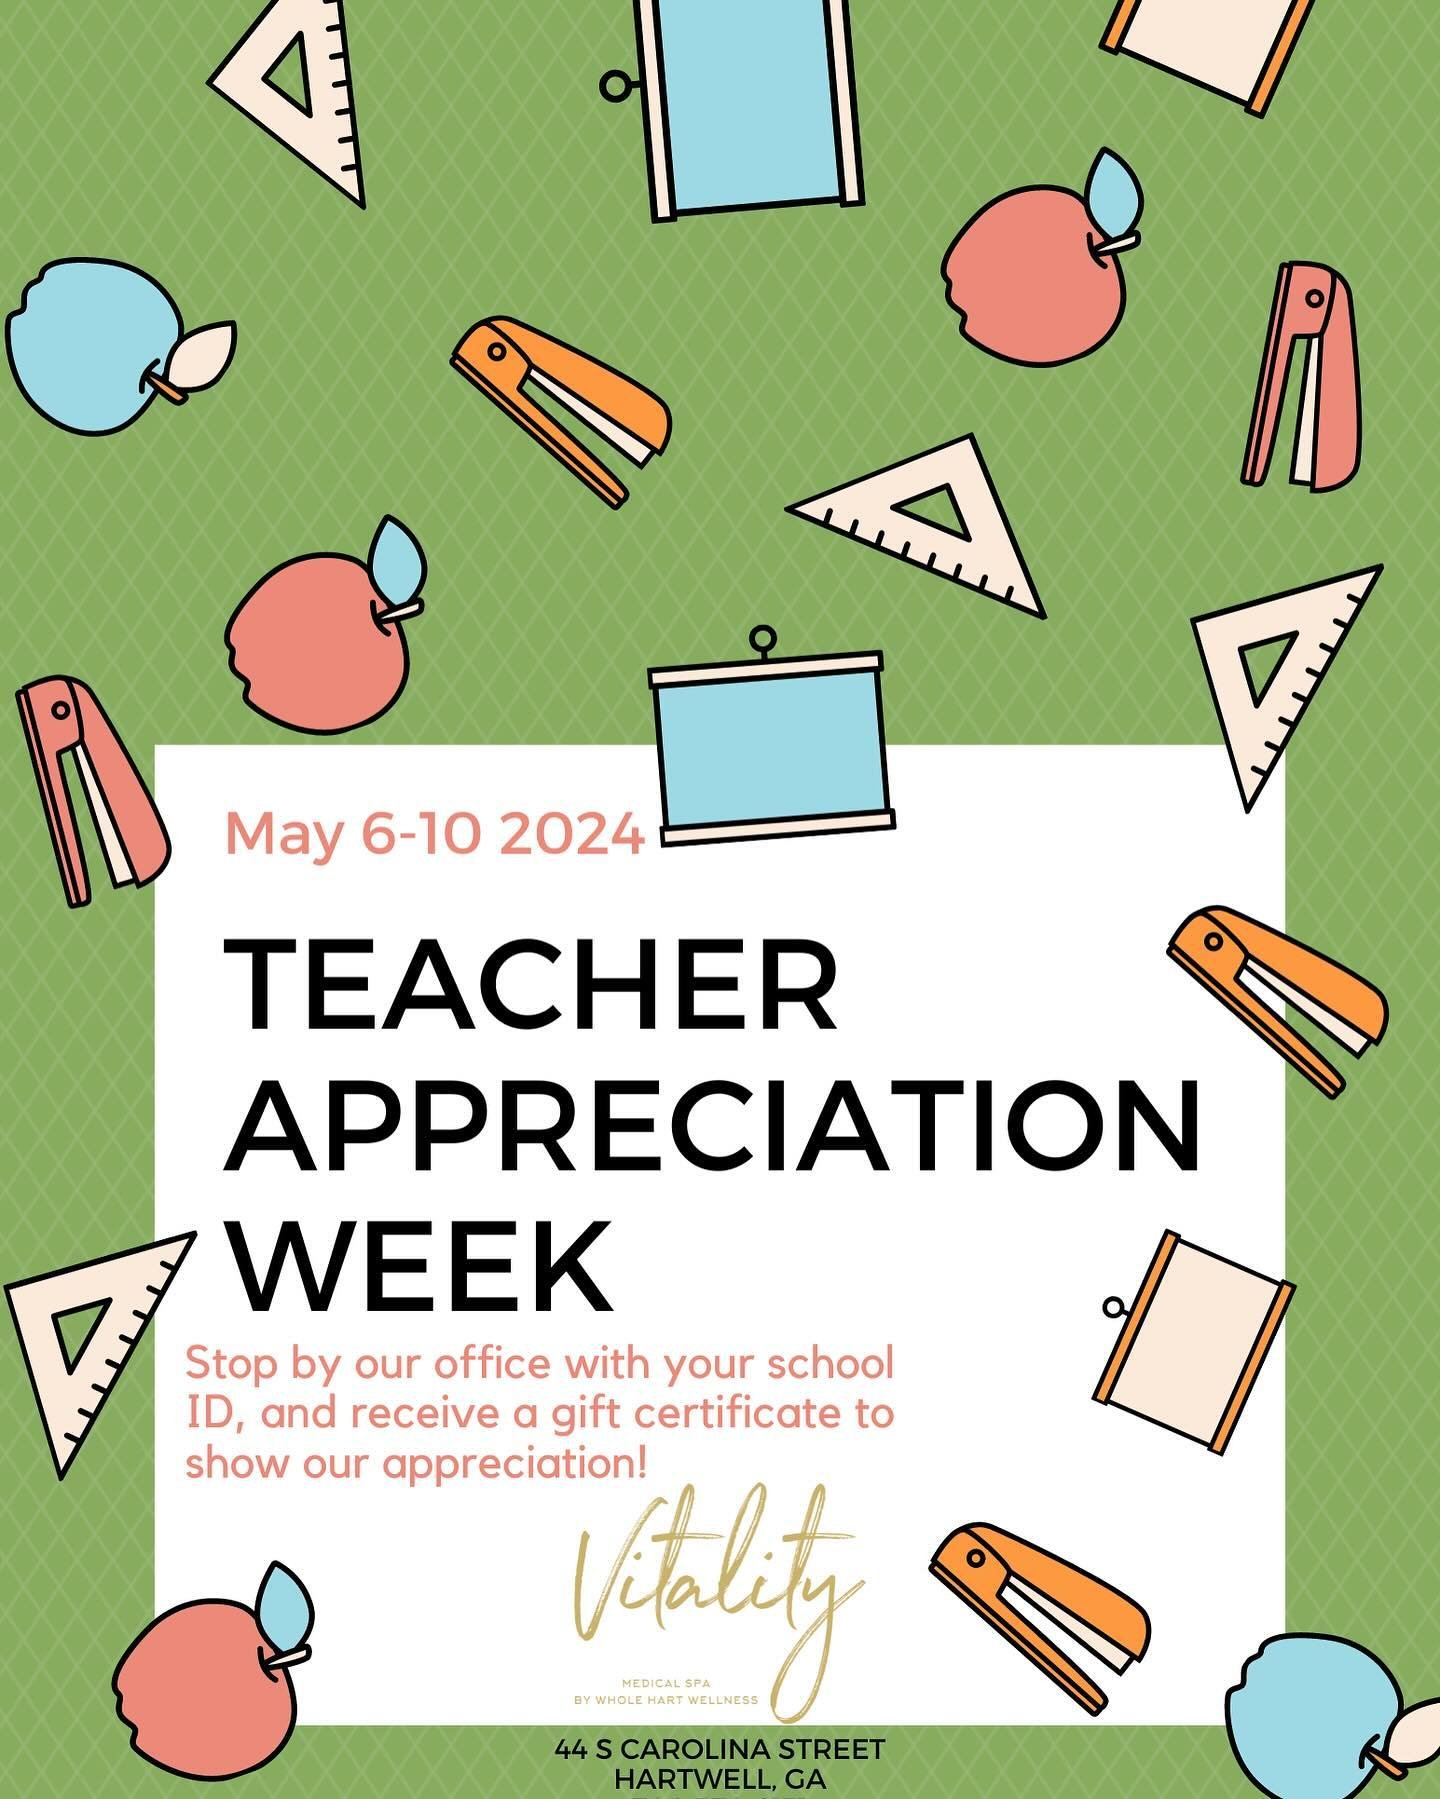 We want to show our appreciation for the hard work of teachers and nurses! Now through May 10th, present your ID and receive a gift certificate as a token of our gratitude. Thank you for all you do! 🍎💉 

44 S Carolina Street
Hartwell, Ga 
706-376-6